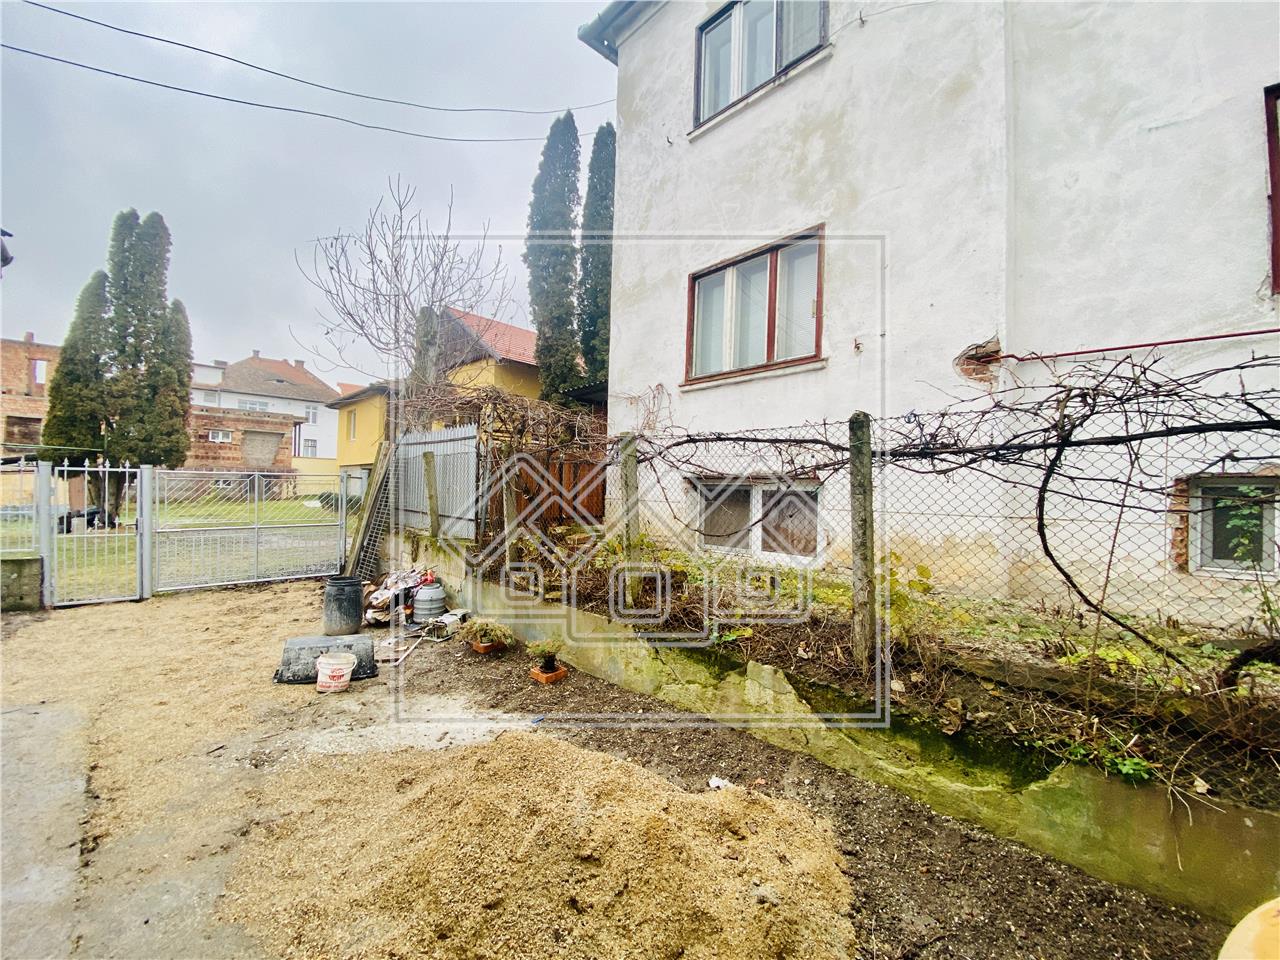 House for sale in Sibiu -70 usable sqm - Central Area